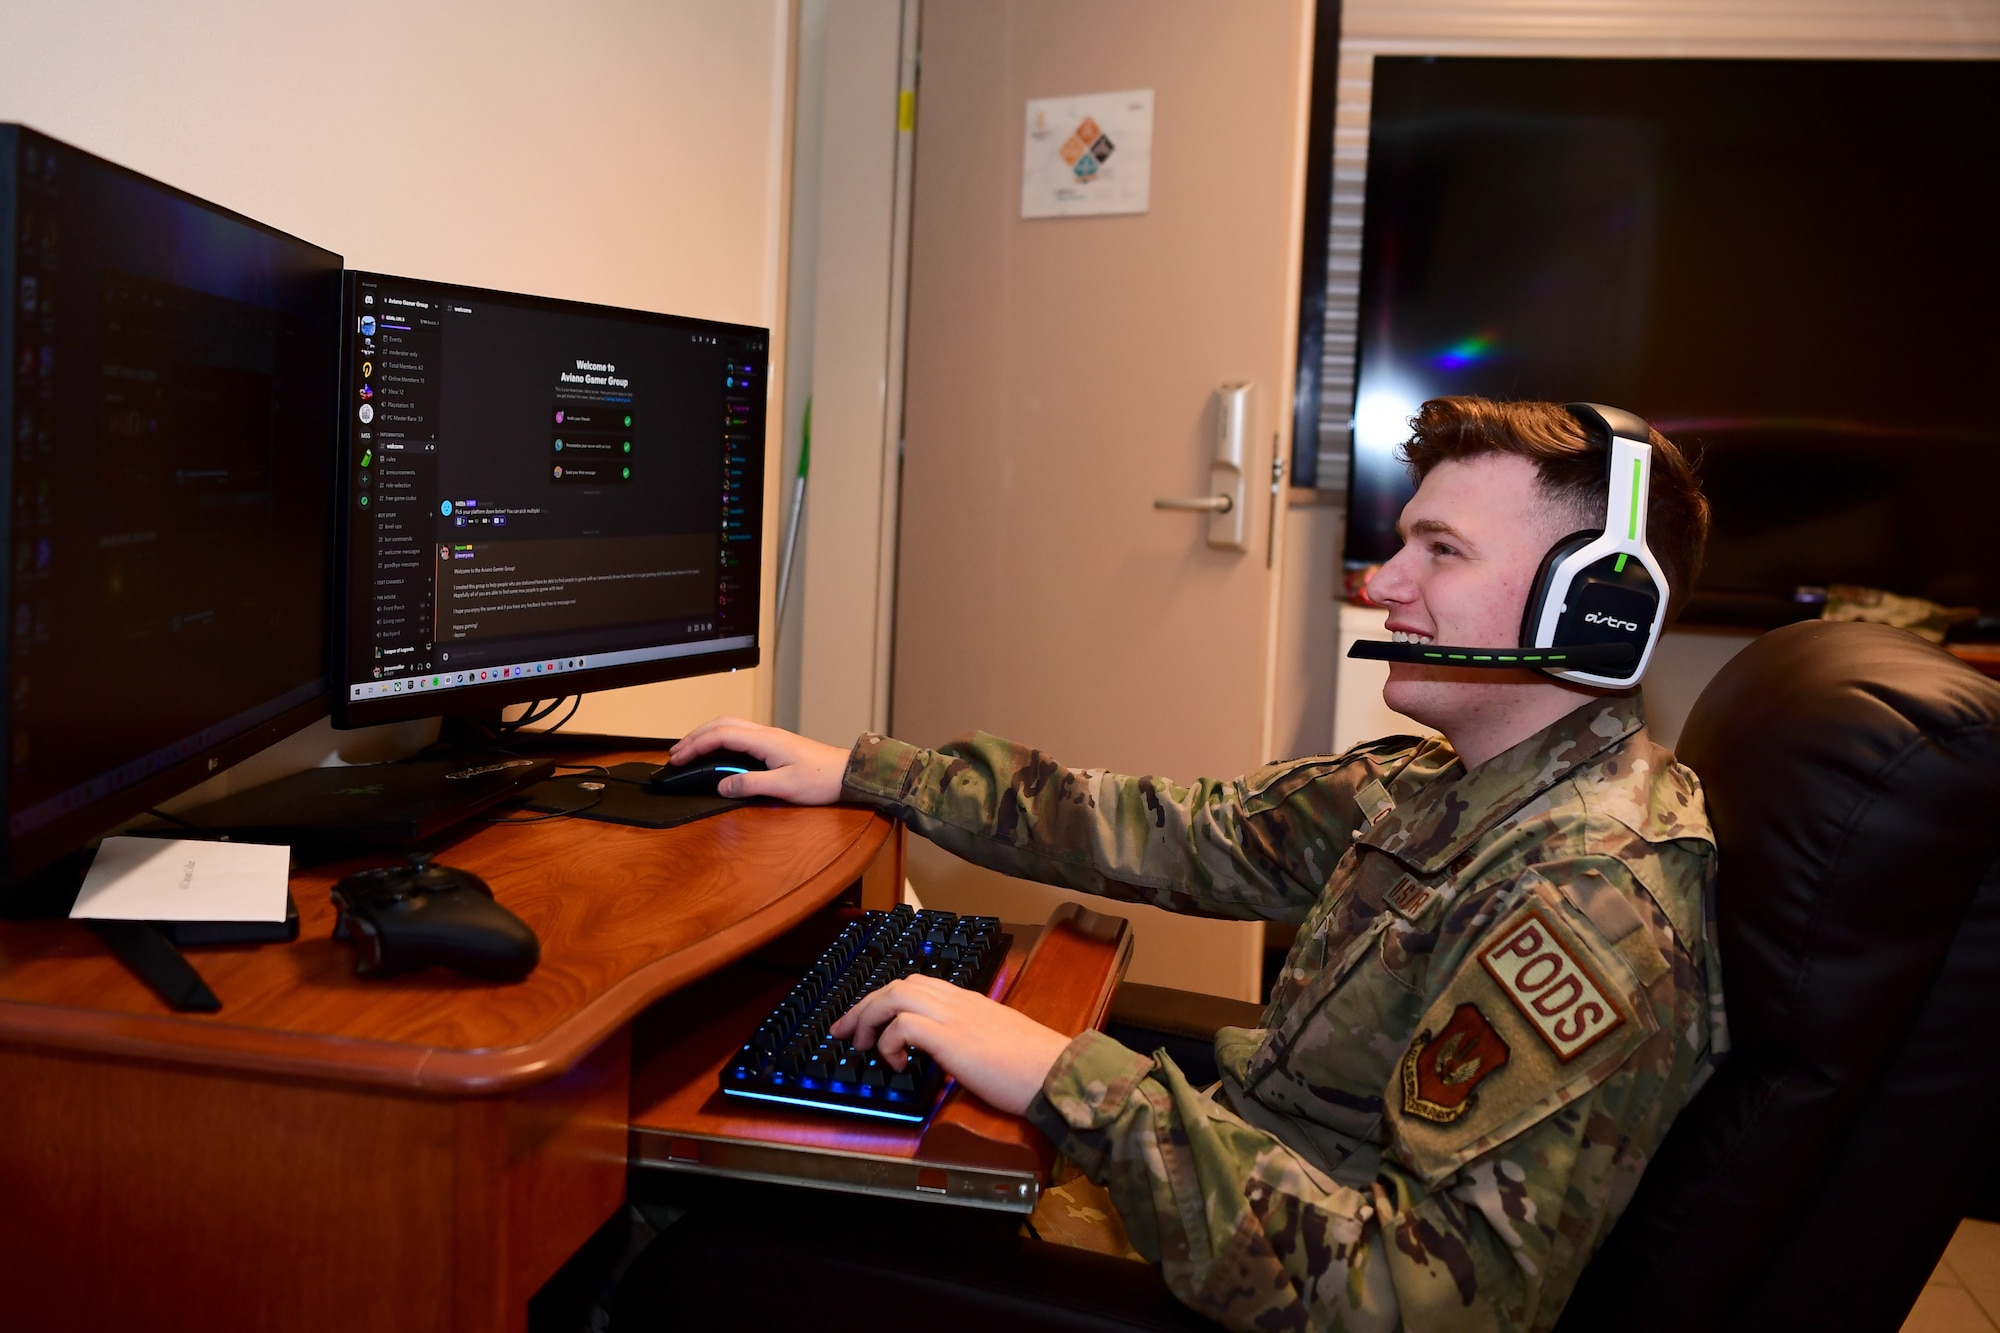 Airman 1st Class Jason Collier, 31st Maintenance Squadron electronic warfare journeyman poses for a photo at Aviano Air Base, Italy, Jan. 26, 2022. Collier created a virtual chat room so other airmen on base could stay connected. (U.S. Air Force photo by Senior Airman Noah Sudolcan)